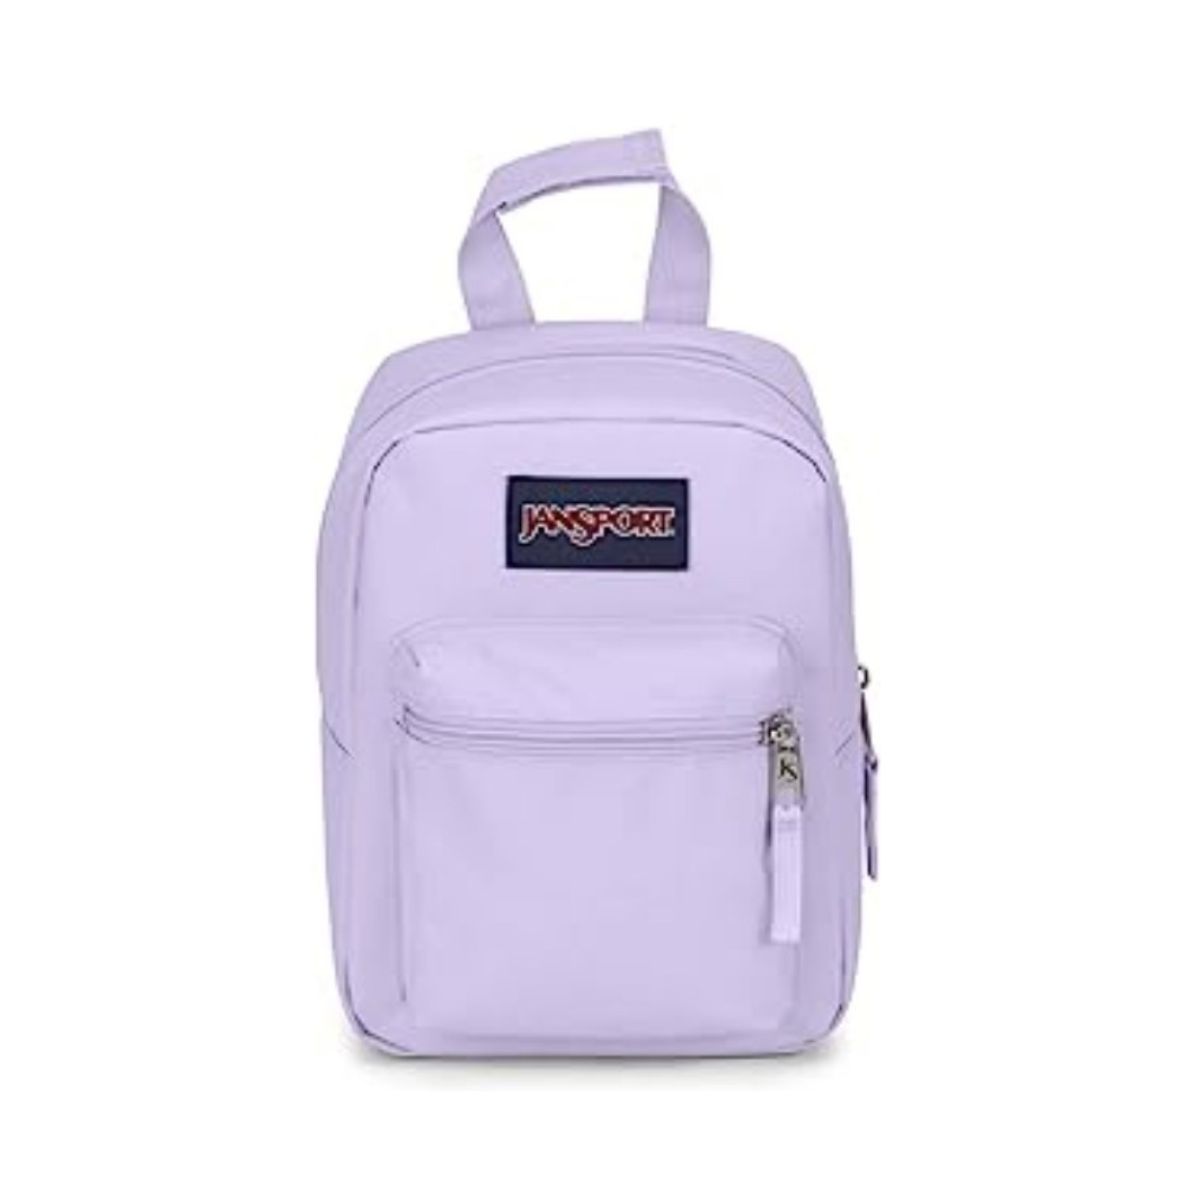 Purple insulated lunch box that looks like a tiny backpack